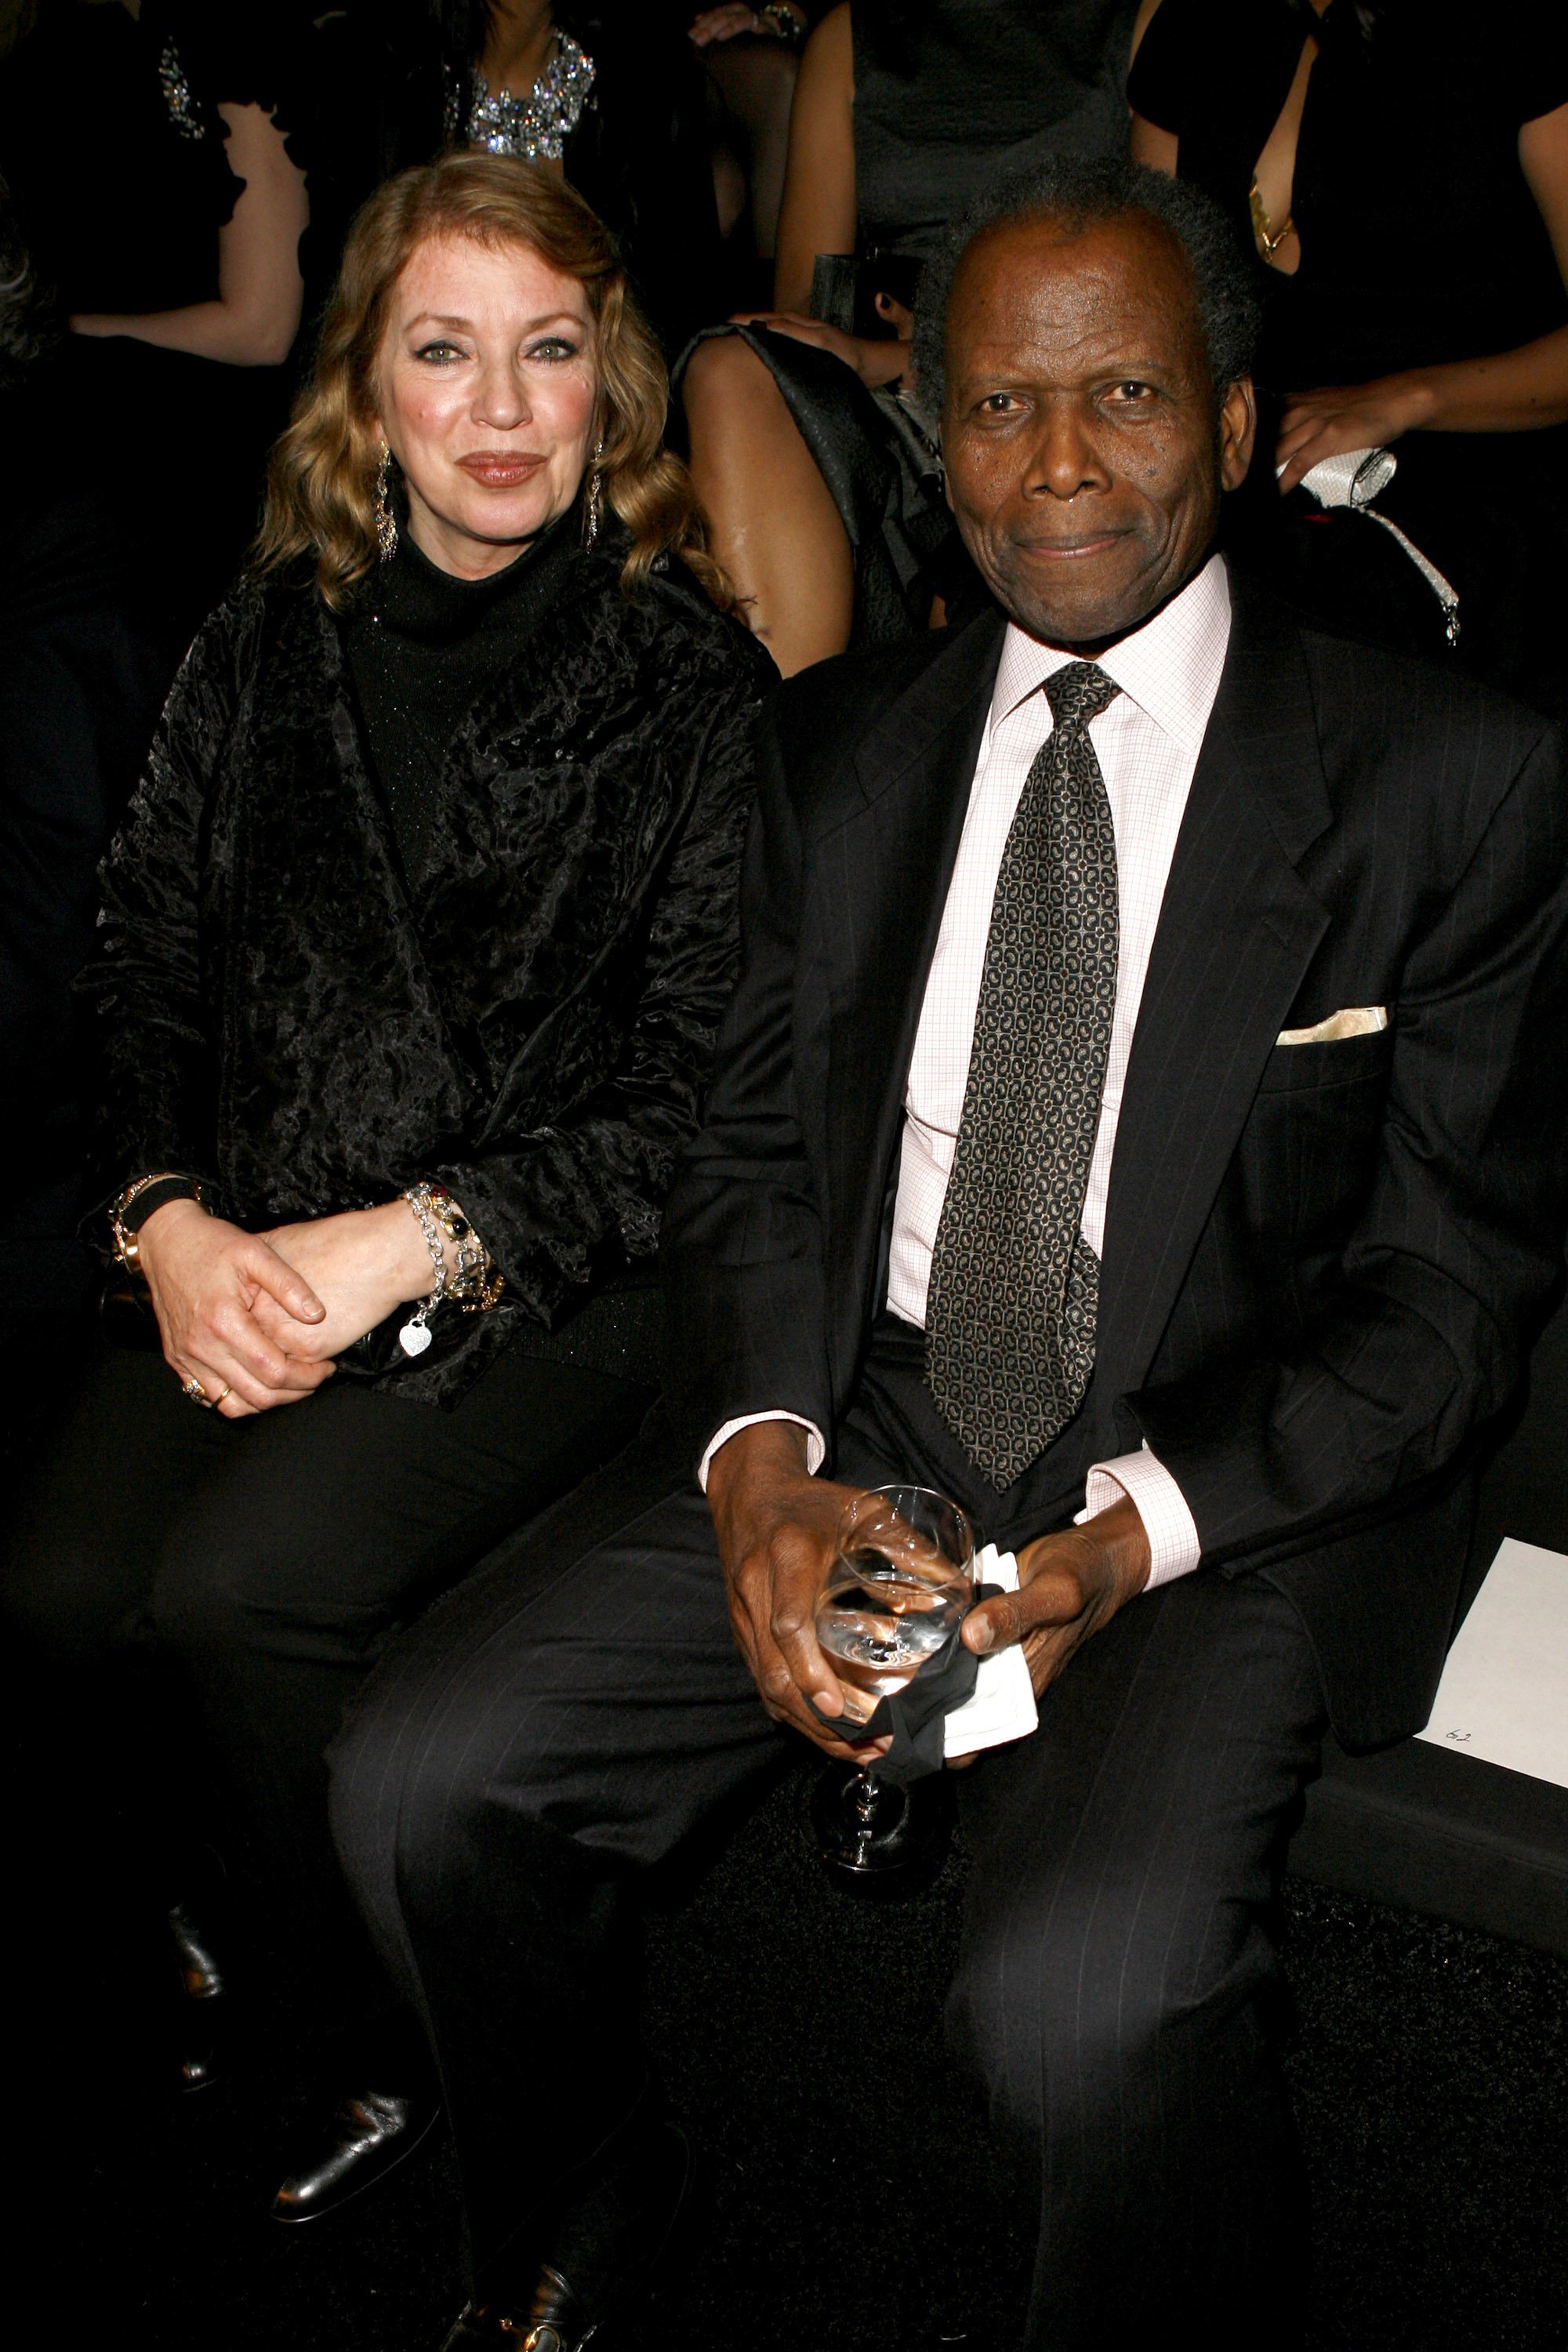 Sidney Poitier and Joanna Shimkus during Giorgio Armani Prive in Los Angeles, California. | Photo: Getty Images